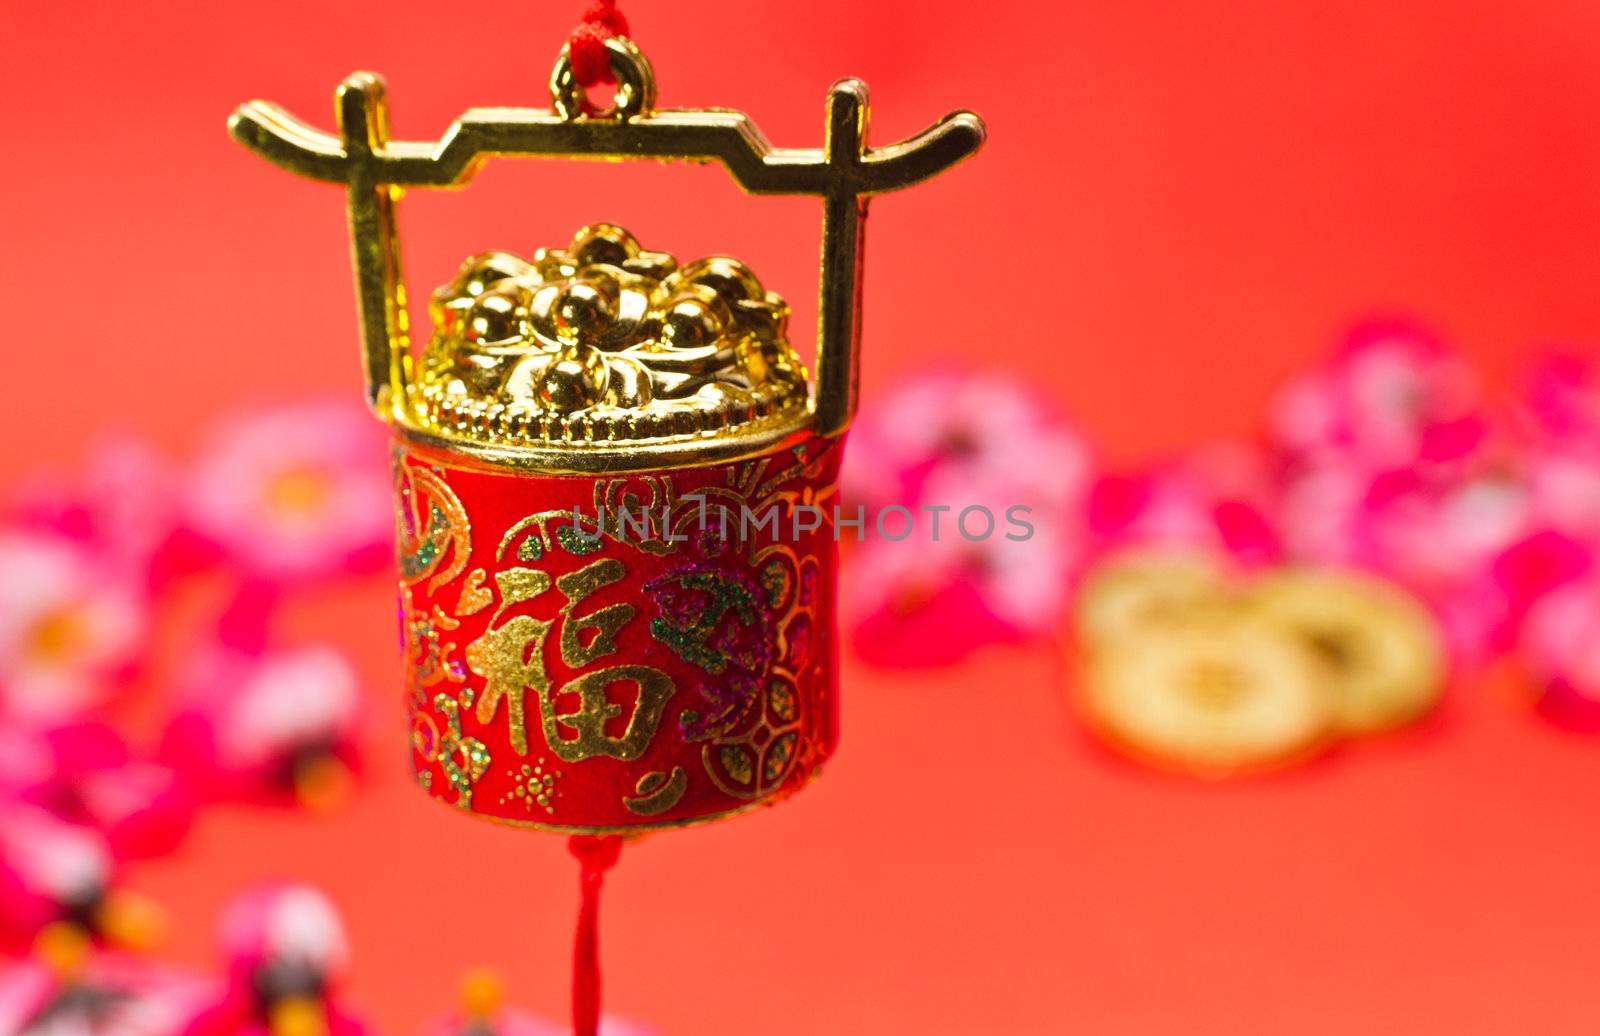 Chinese New Year ornament on red background with blurry image for festive using